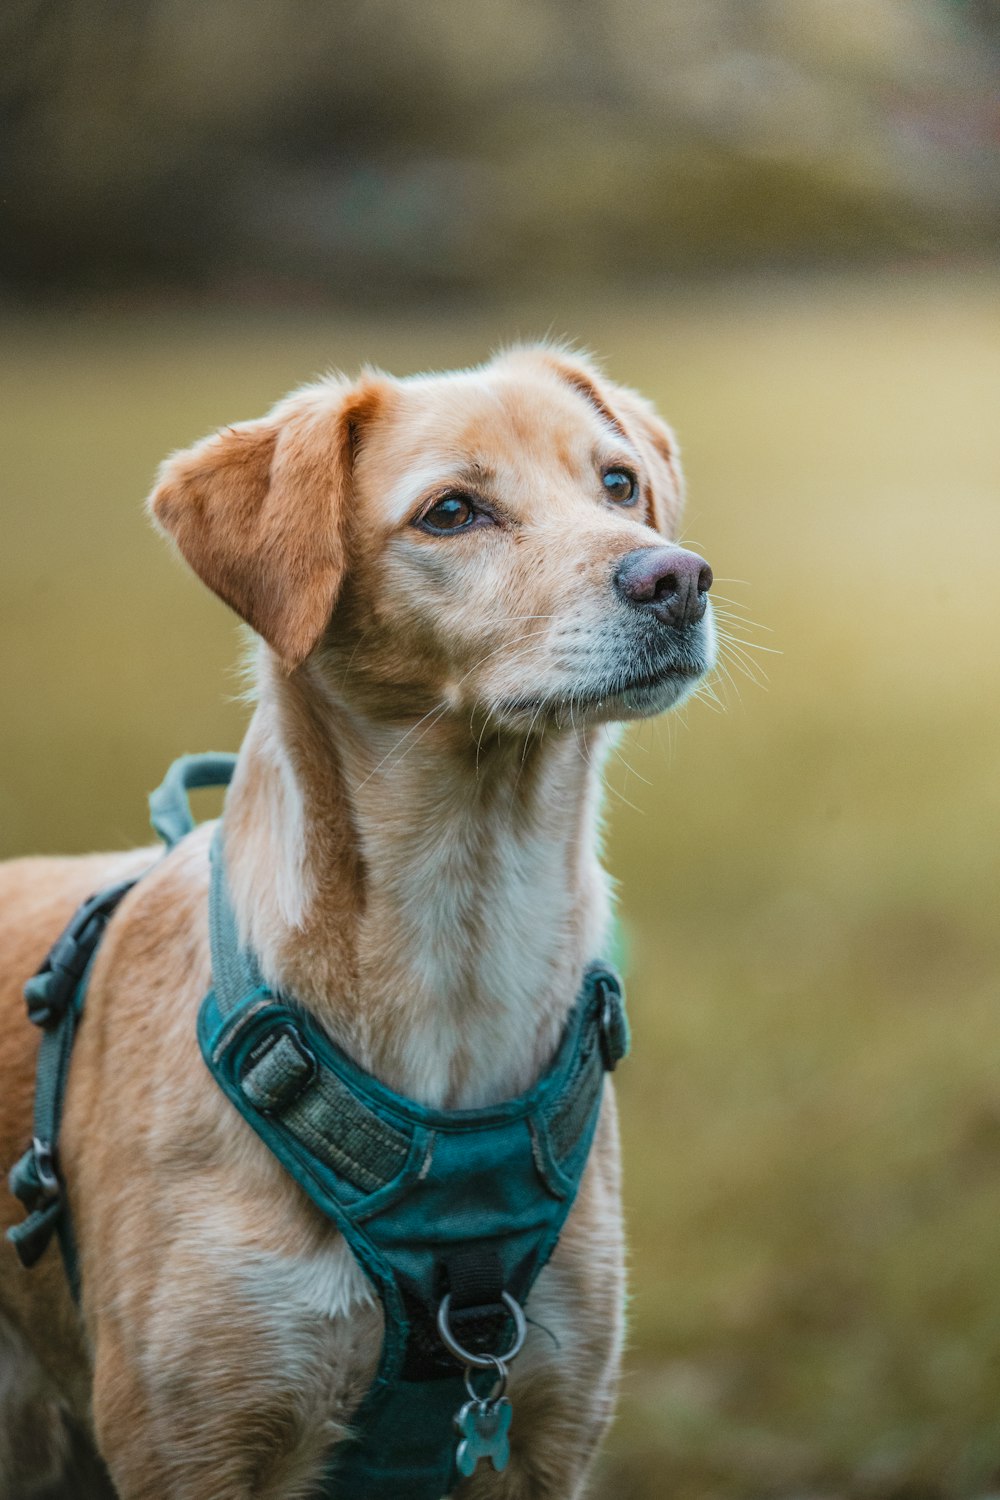 a small brown dog wearing a green harness